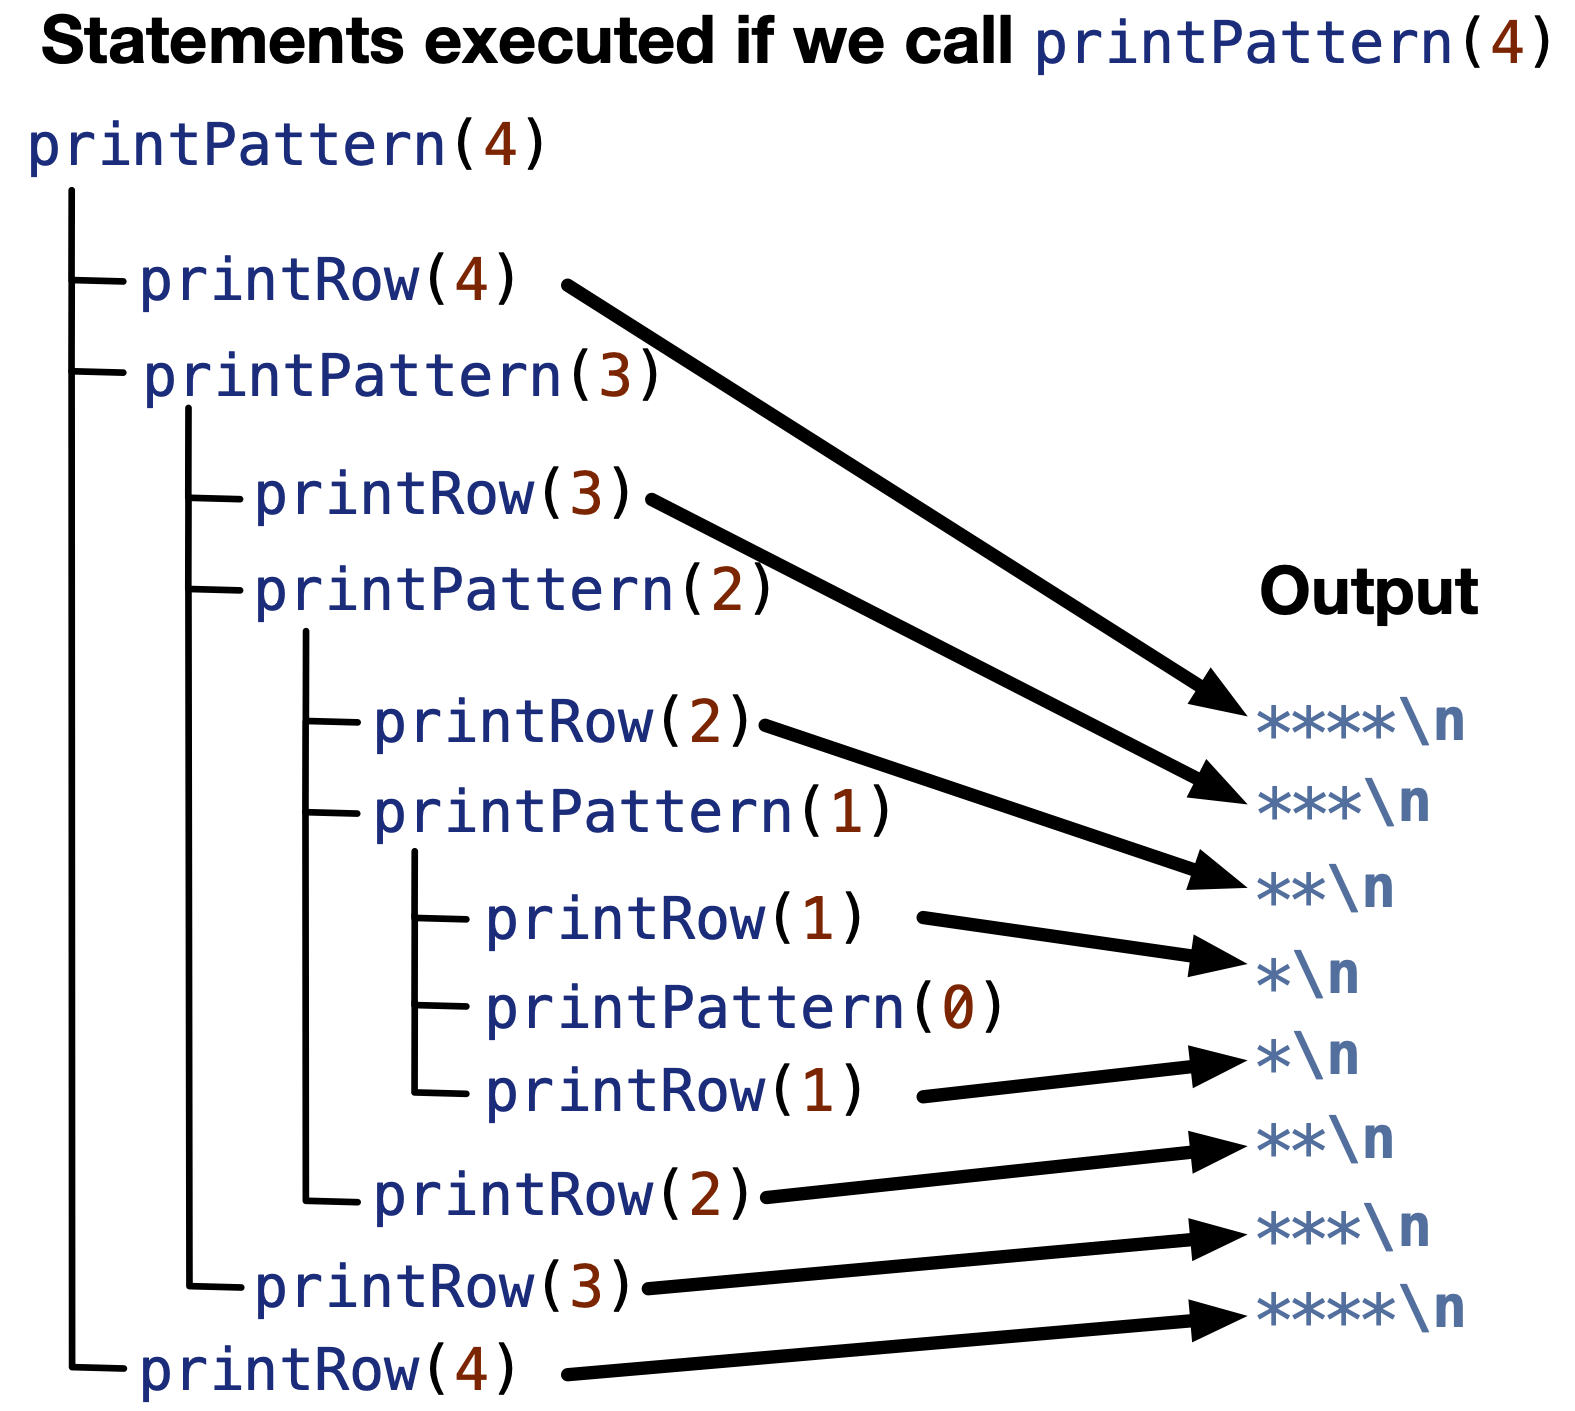 Tracing `printPattern` function with n = 4